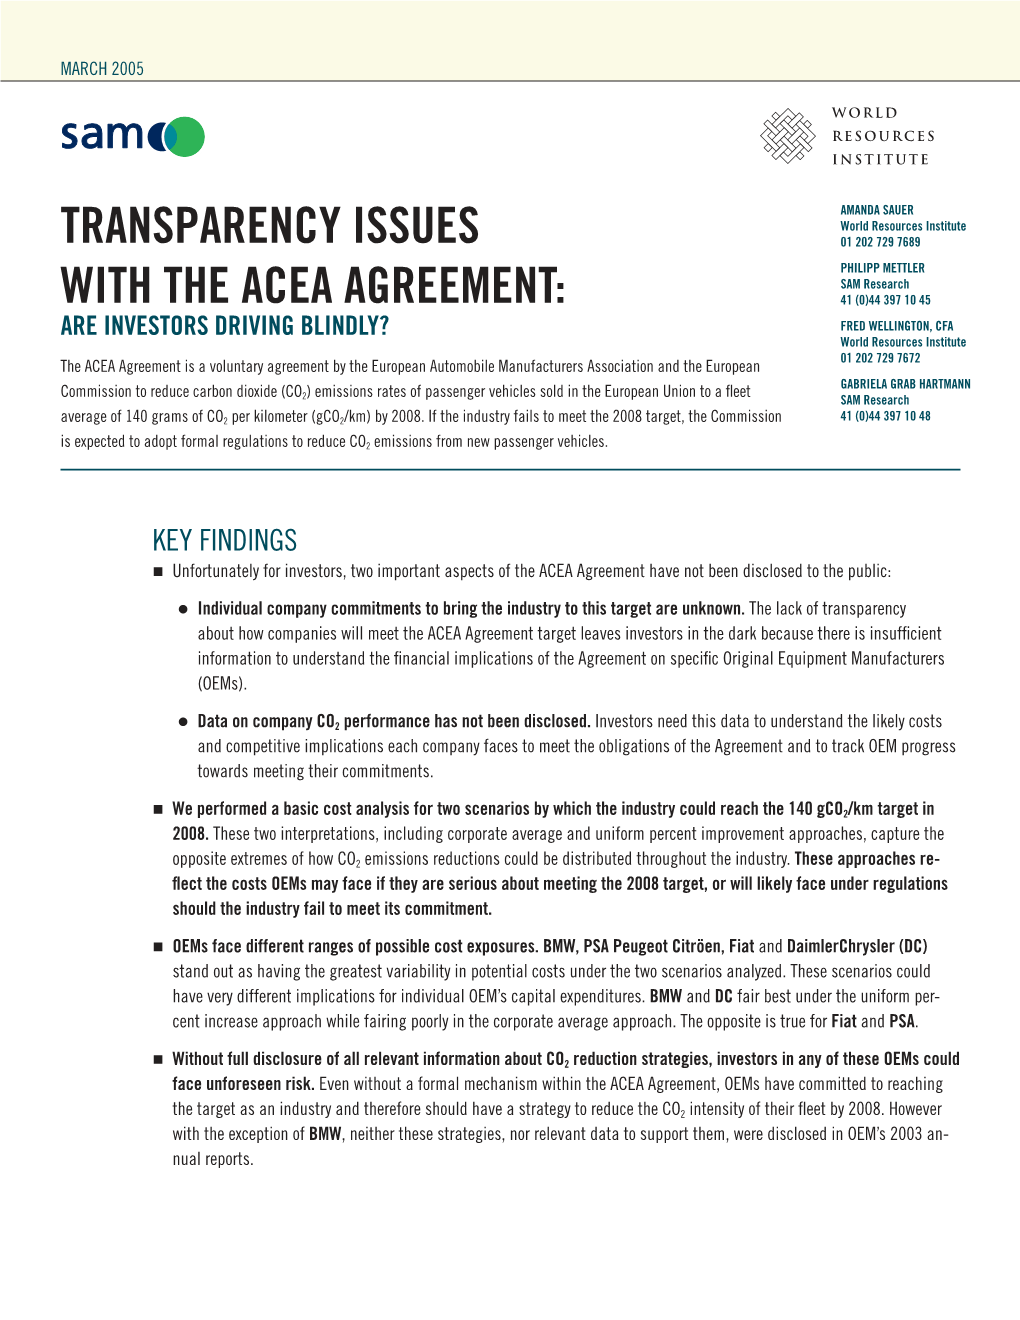 Transparency Issues with the Acea Agreement